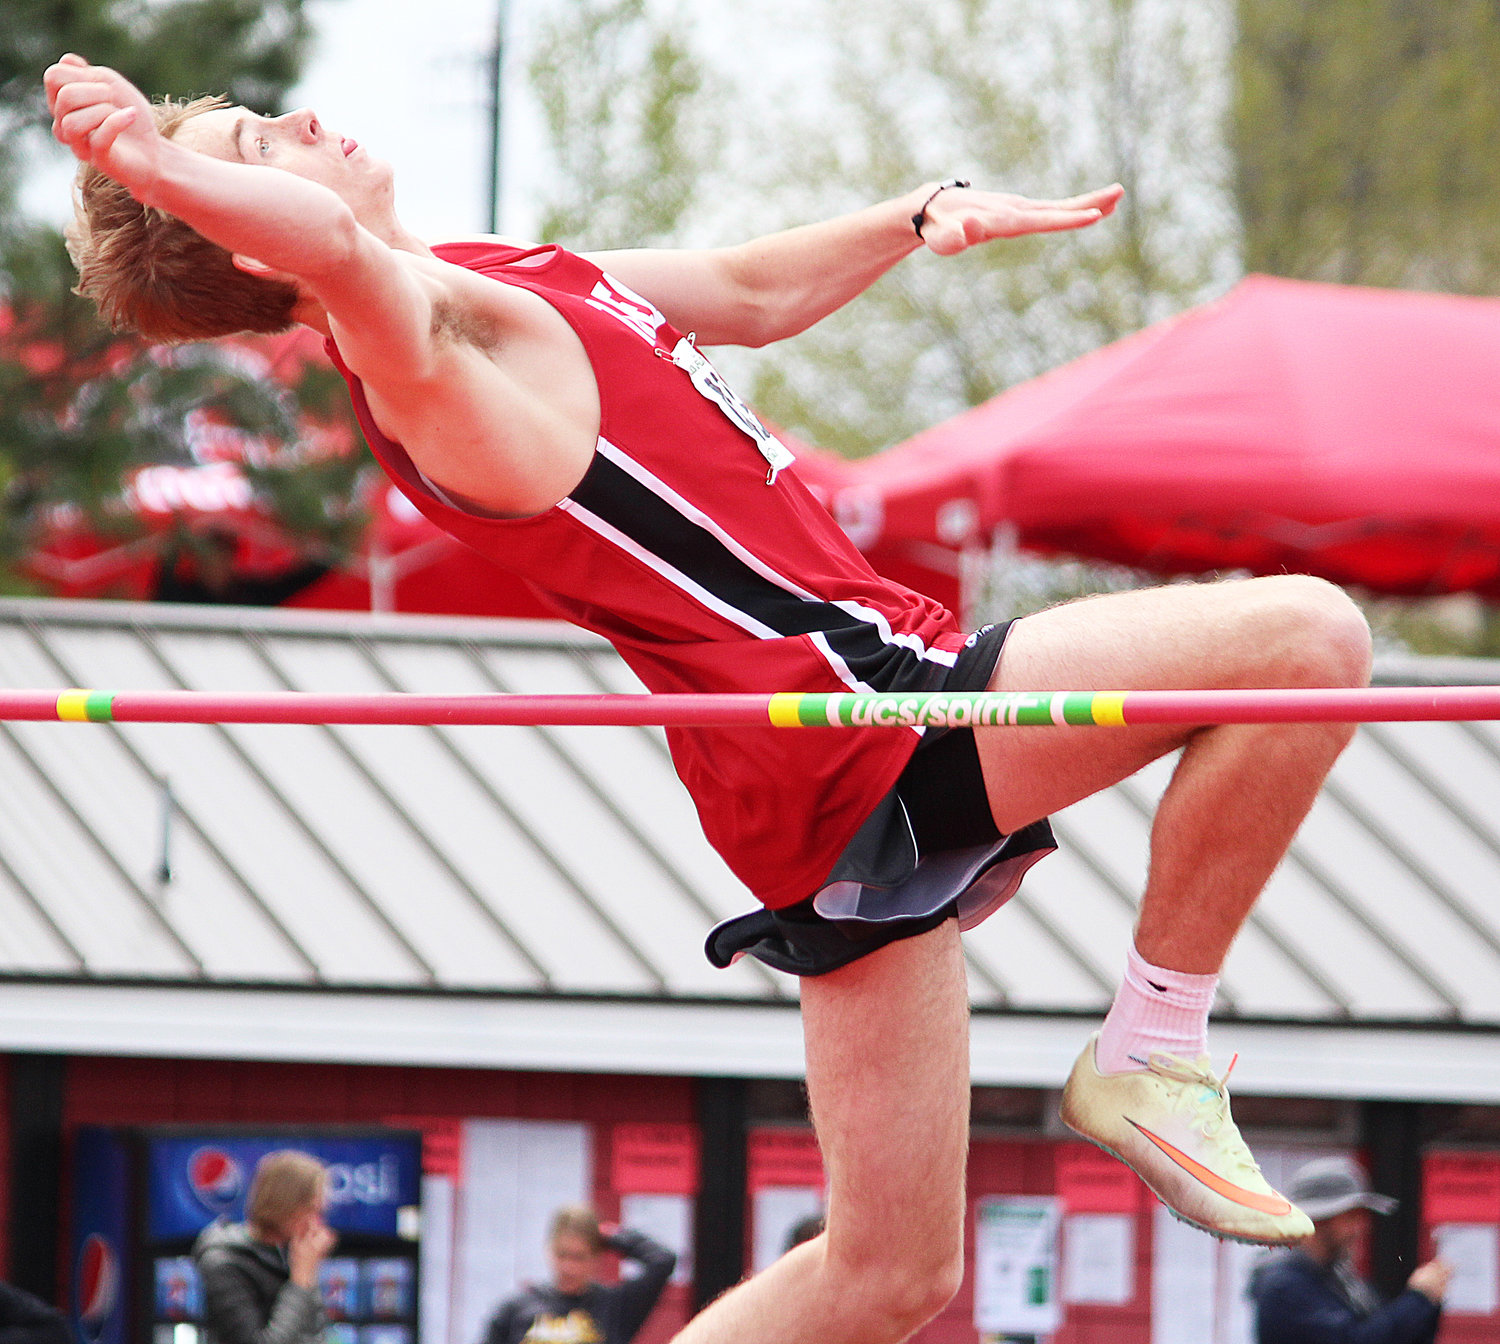 Toledo's Conner Olmstead clears the high jump bar during the State 1B/2B/1A Track and Field Championships in Cheney, Washington on May 27, 2022.